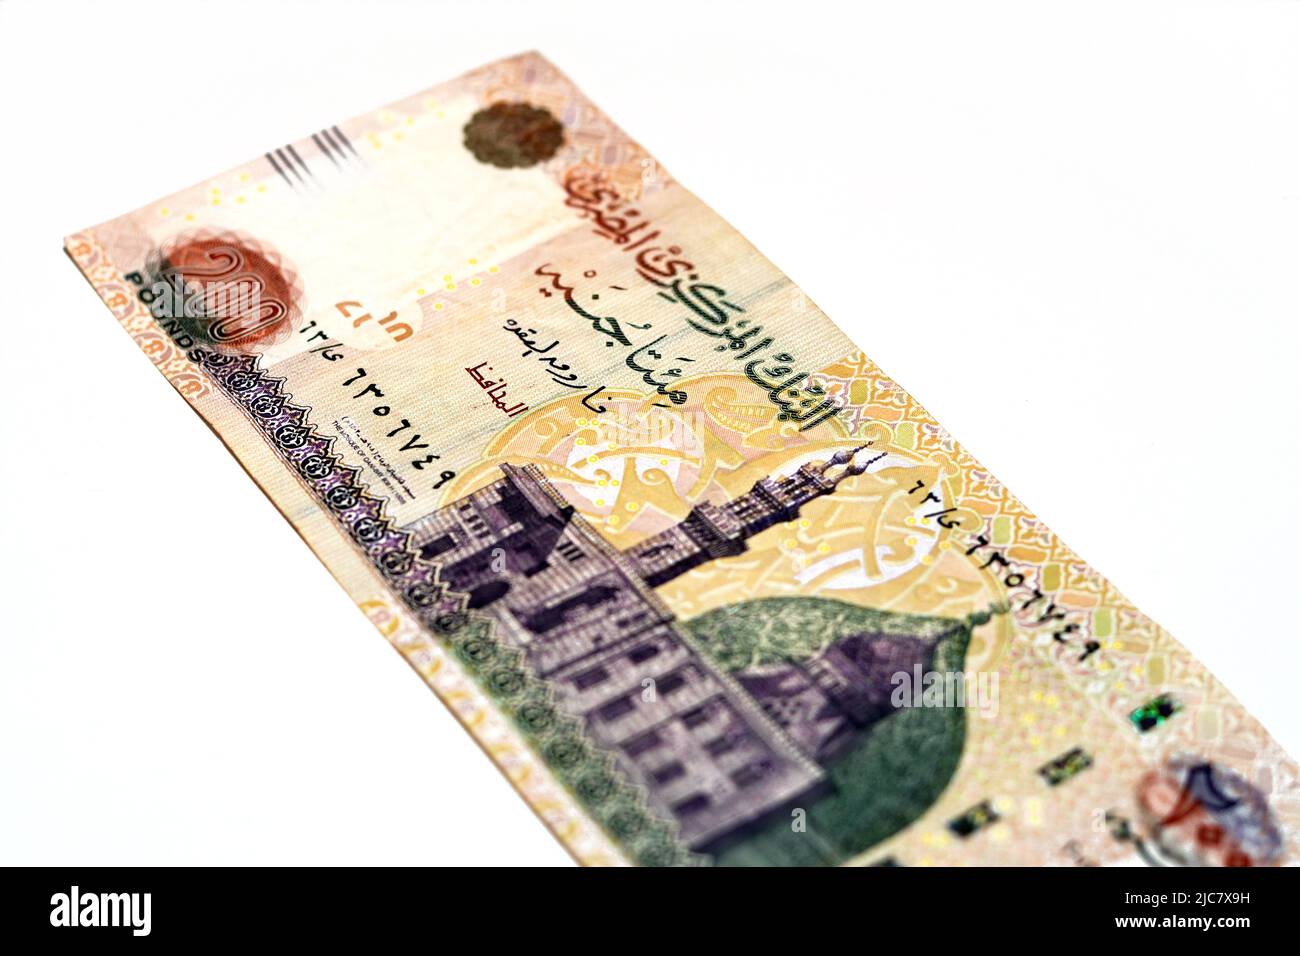 Obverse side of 200 LE two hundred Egyptian pounds banknote series 2012 features Qani-Bay mosque in Cairo Egypt, selective focus of Egypt cash money b Stock Photo